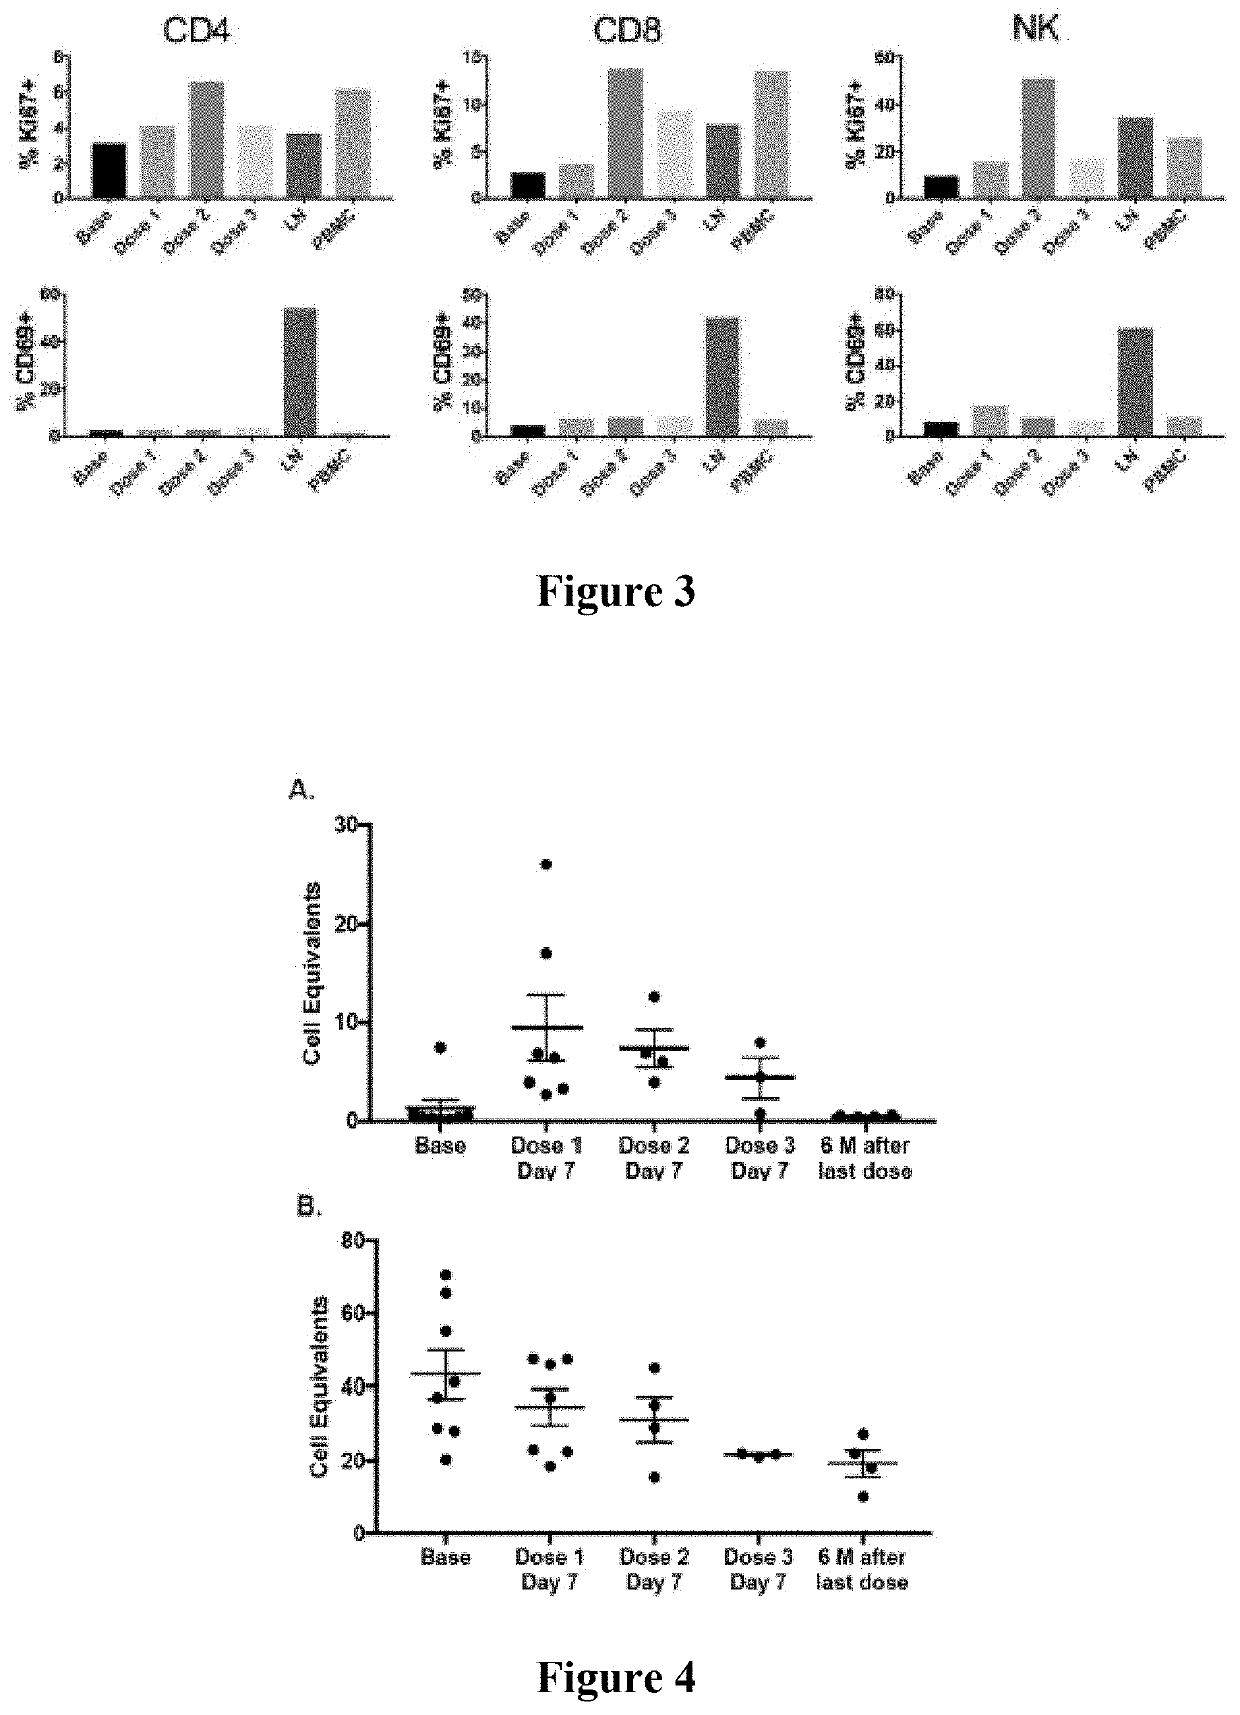 HIV Treatment Compositions And Methods